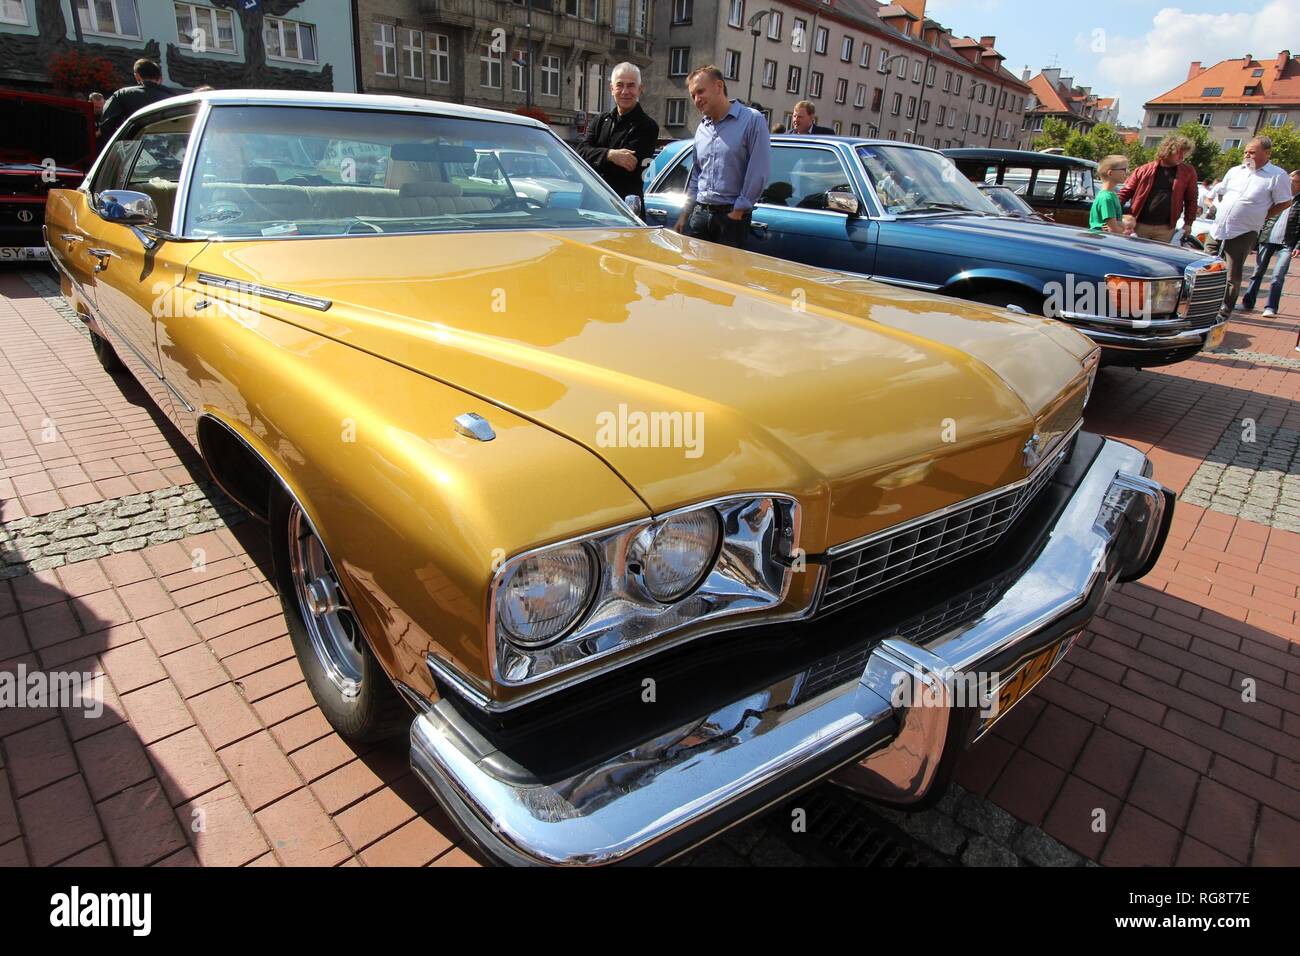 BYTOM, POLAND - SEPTEMBER 12, 2015: People admire 1973 Buick Electra 225 Custom Limited during 12th Historic Vehicle Rally in Bytom. The annual vehicl Stock Photo